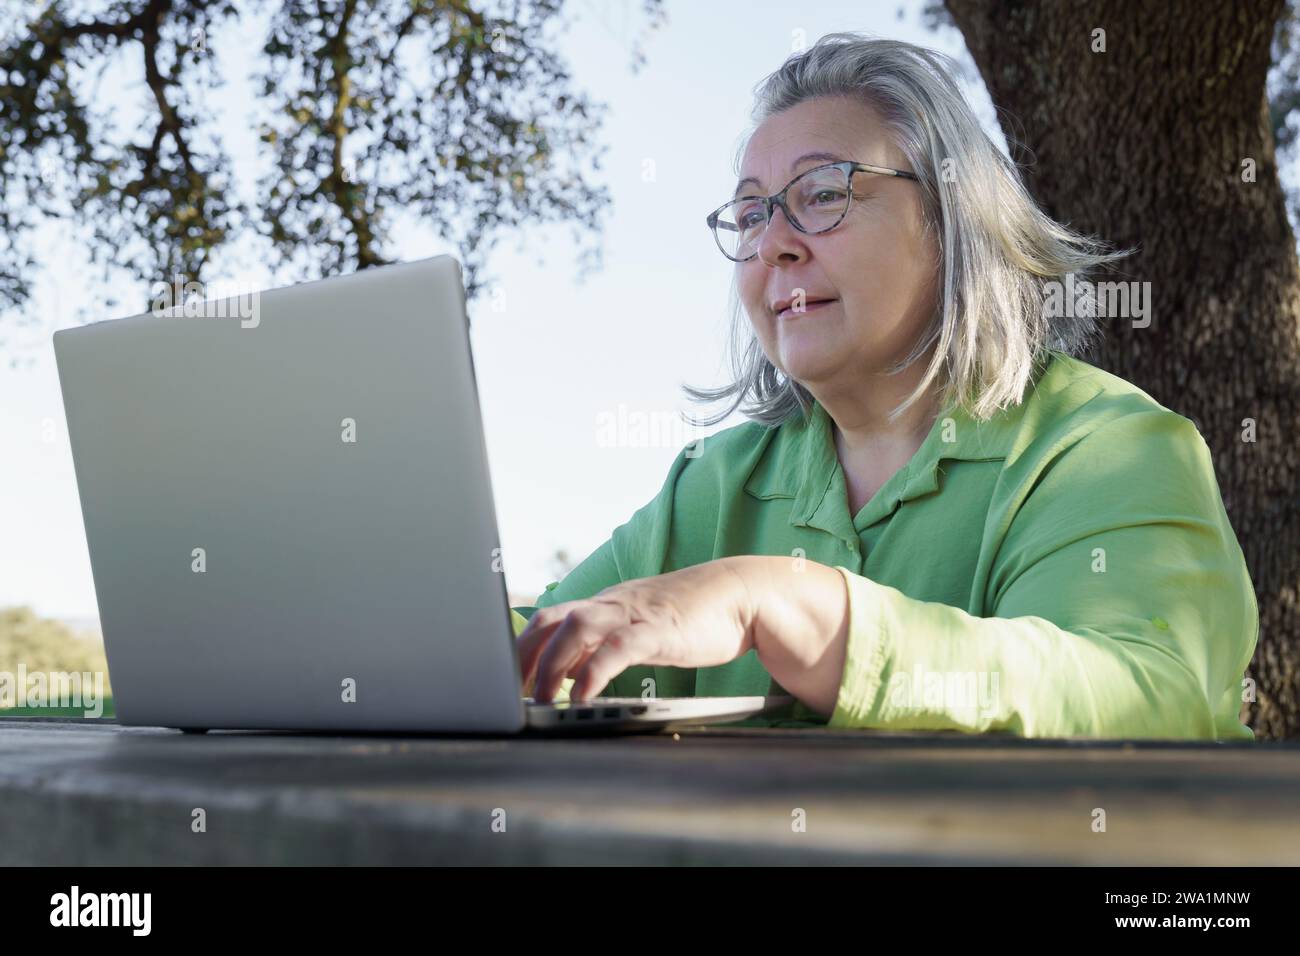 mature woman with white hair  smiling as she works at her computer Stock Photo